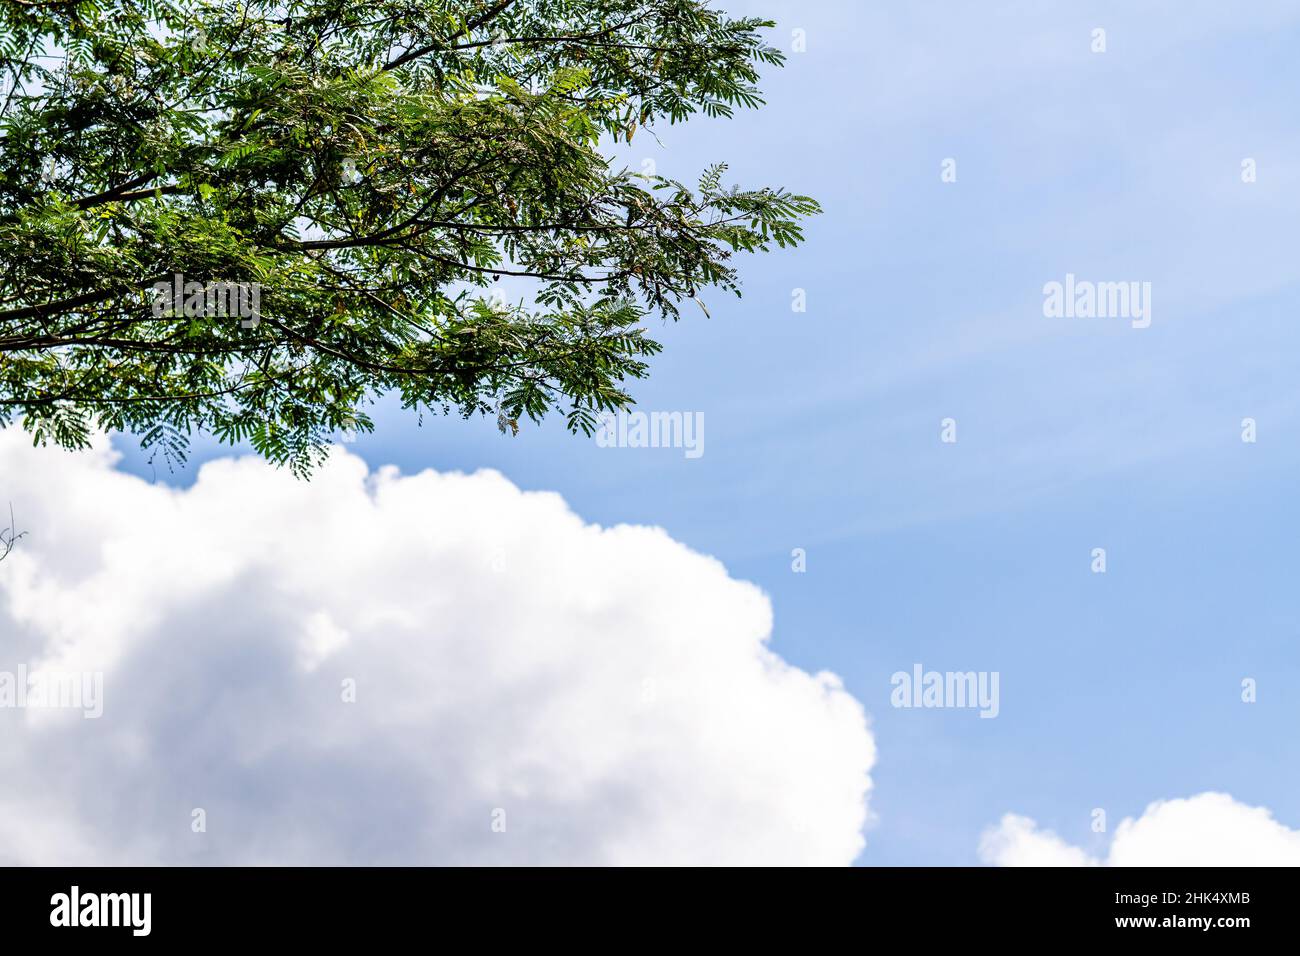 Albisia tree branch with small green leaves, clear sky background Stock Photo